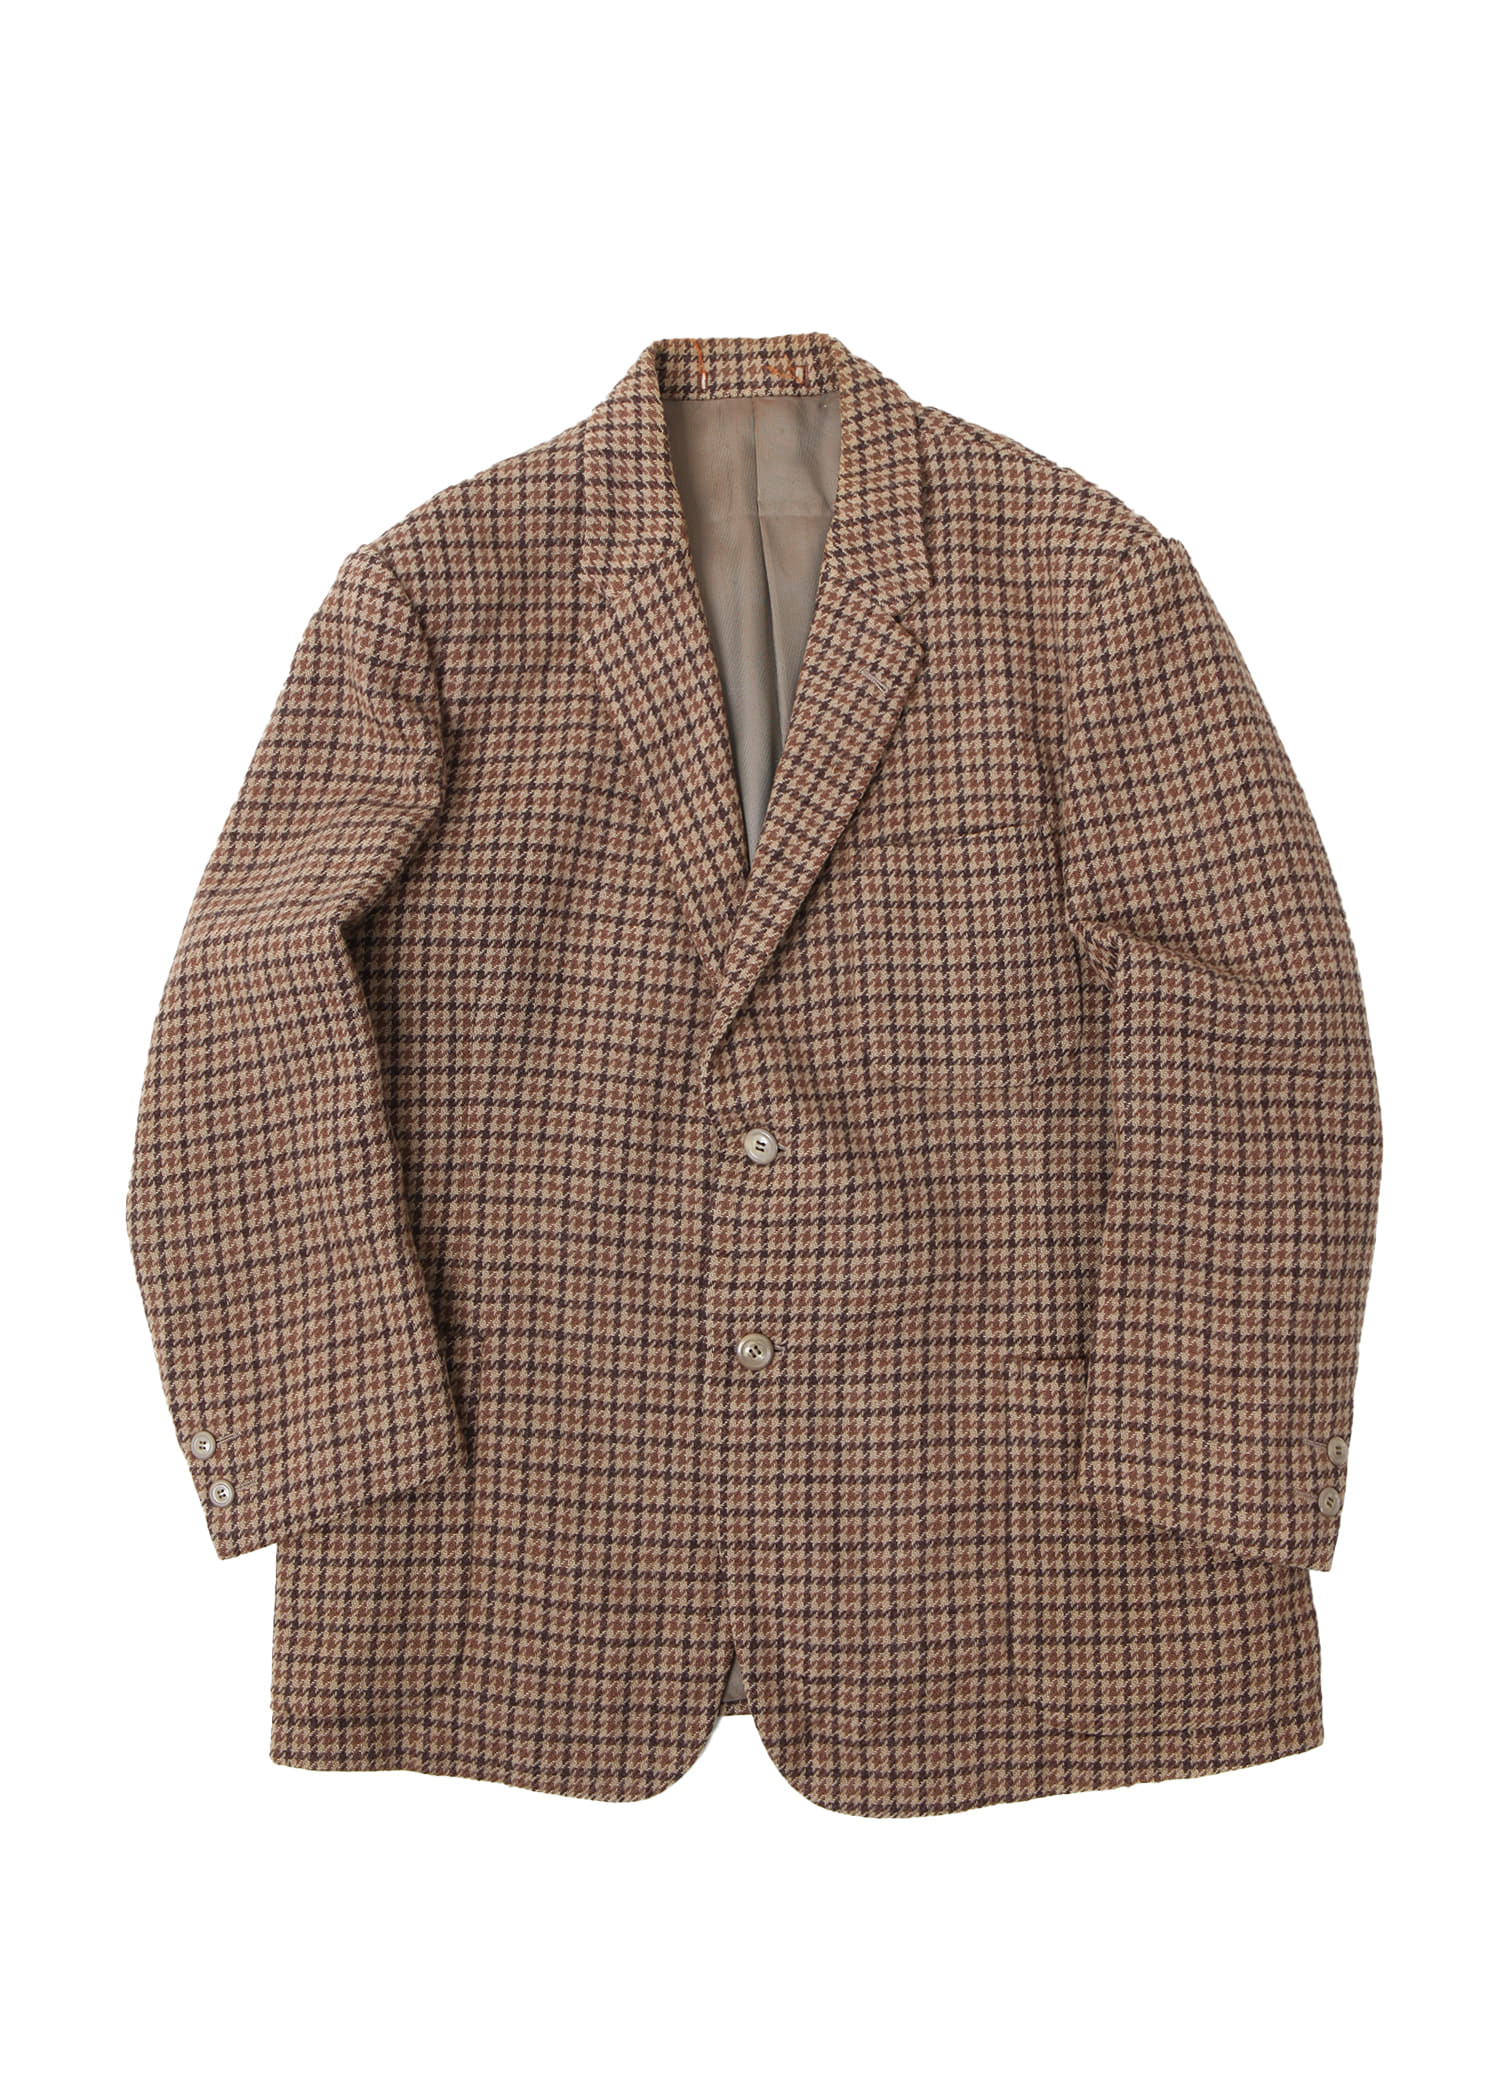 select vintage : hound tooth check jacket